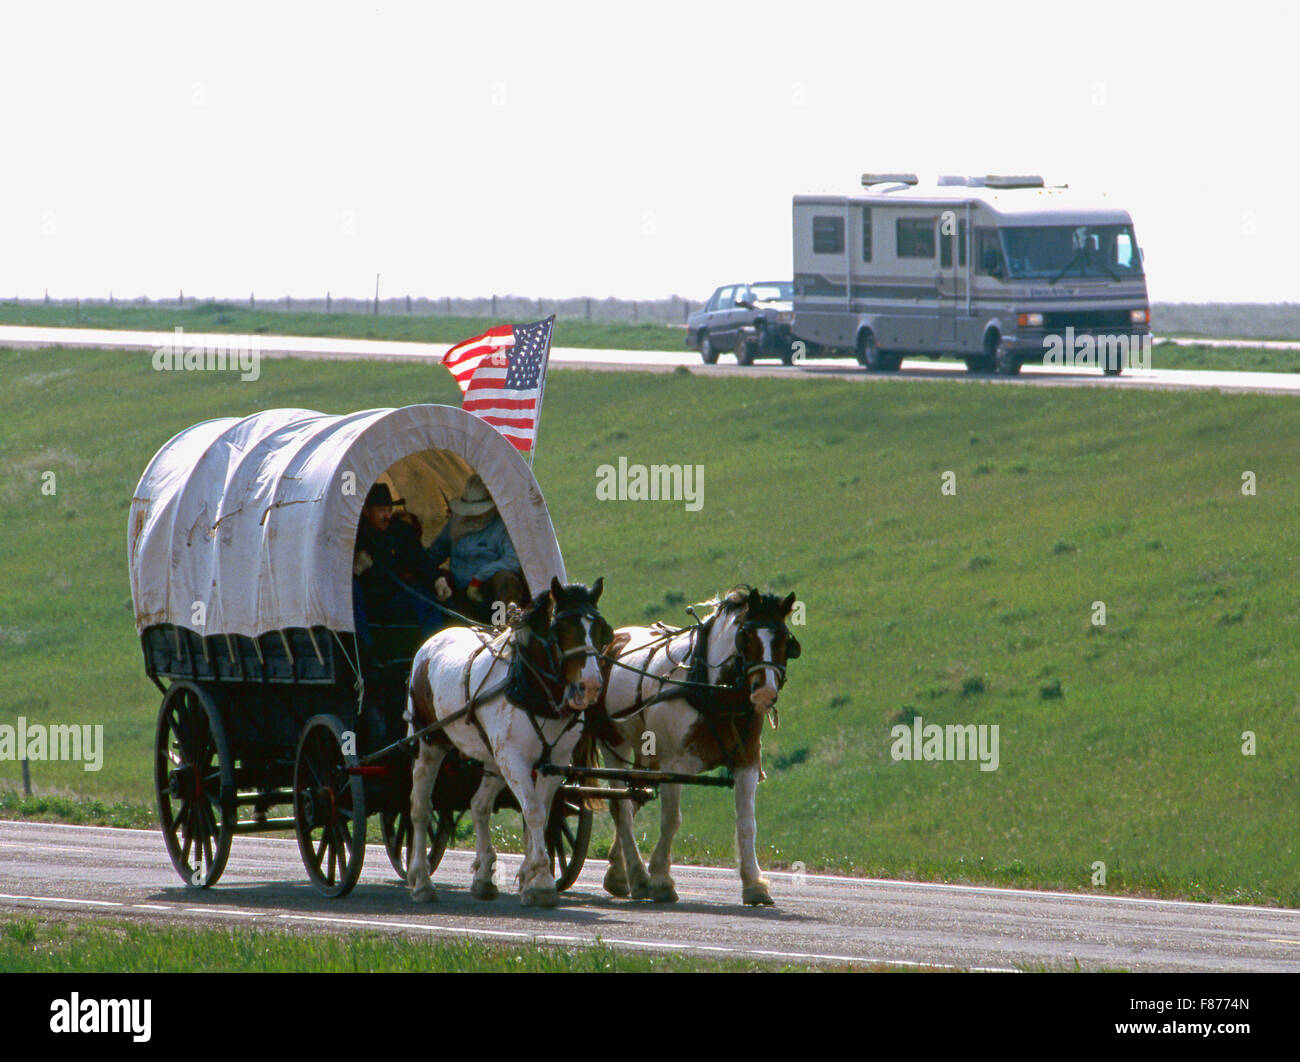 A recreational vehicle passes covered wagons and horseback riders on the modern South Dakota prairie outside Rapid City. Stock Photo